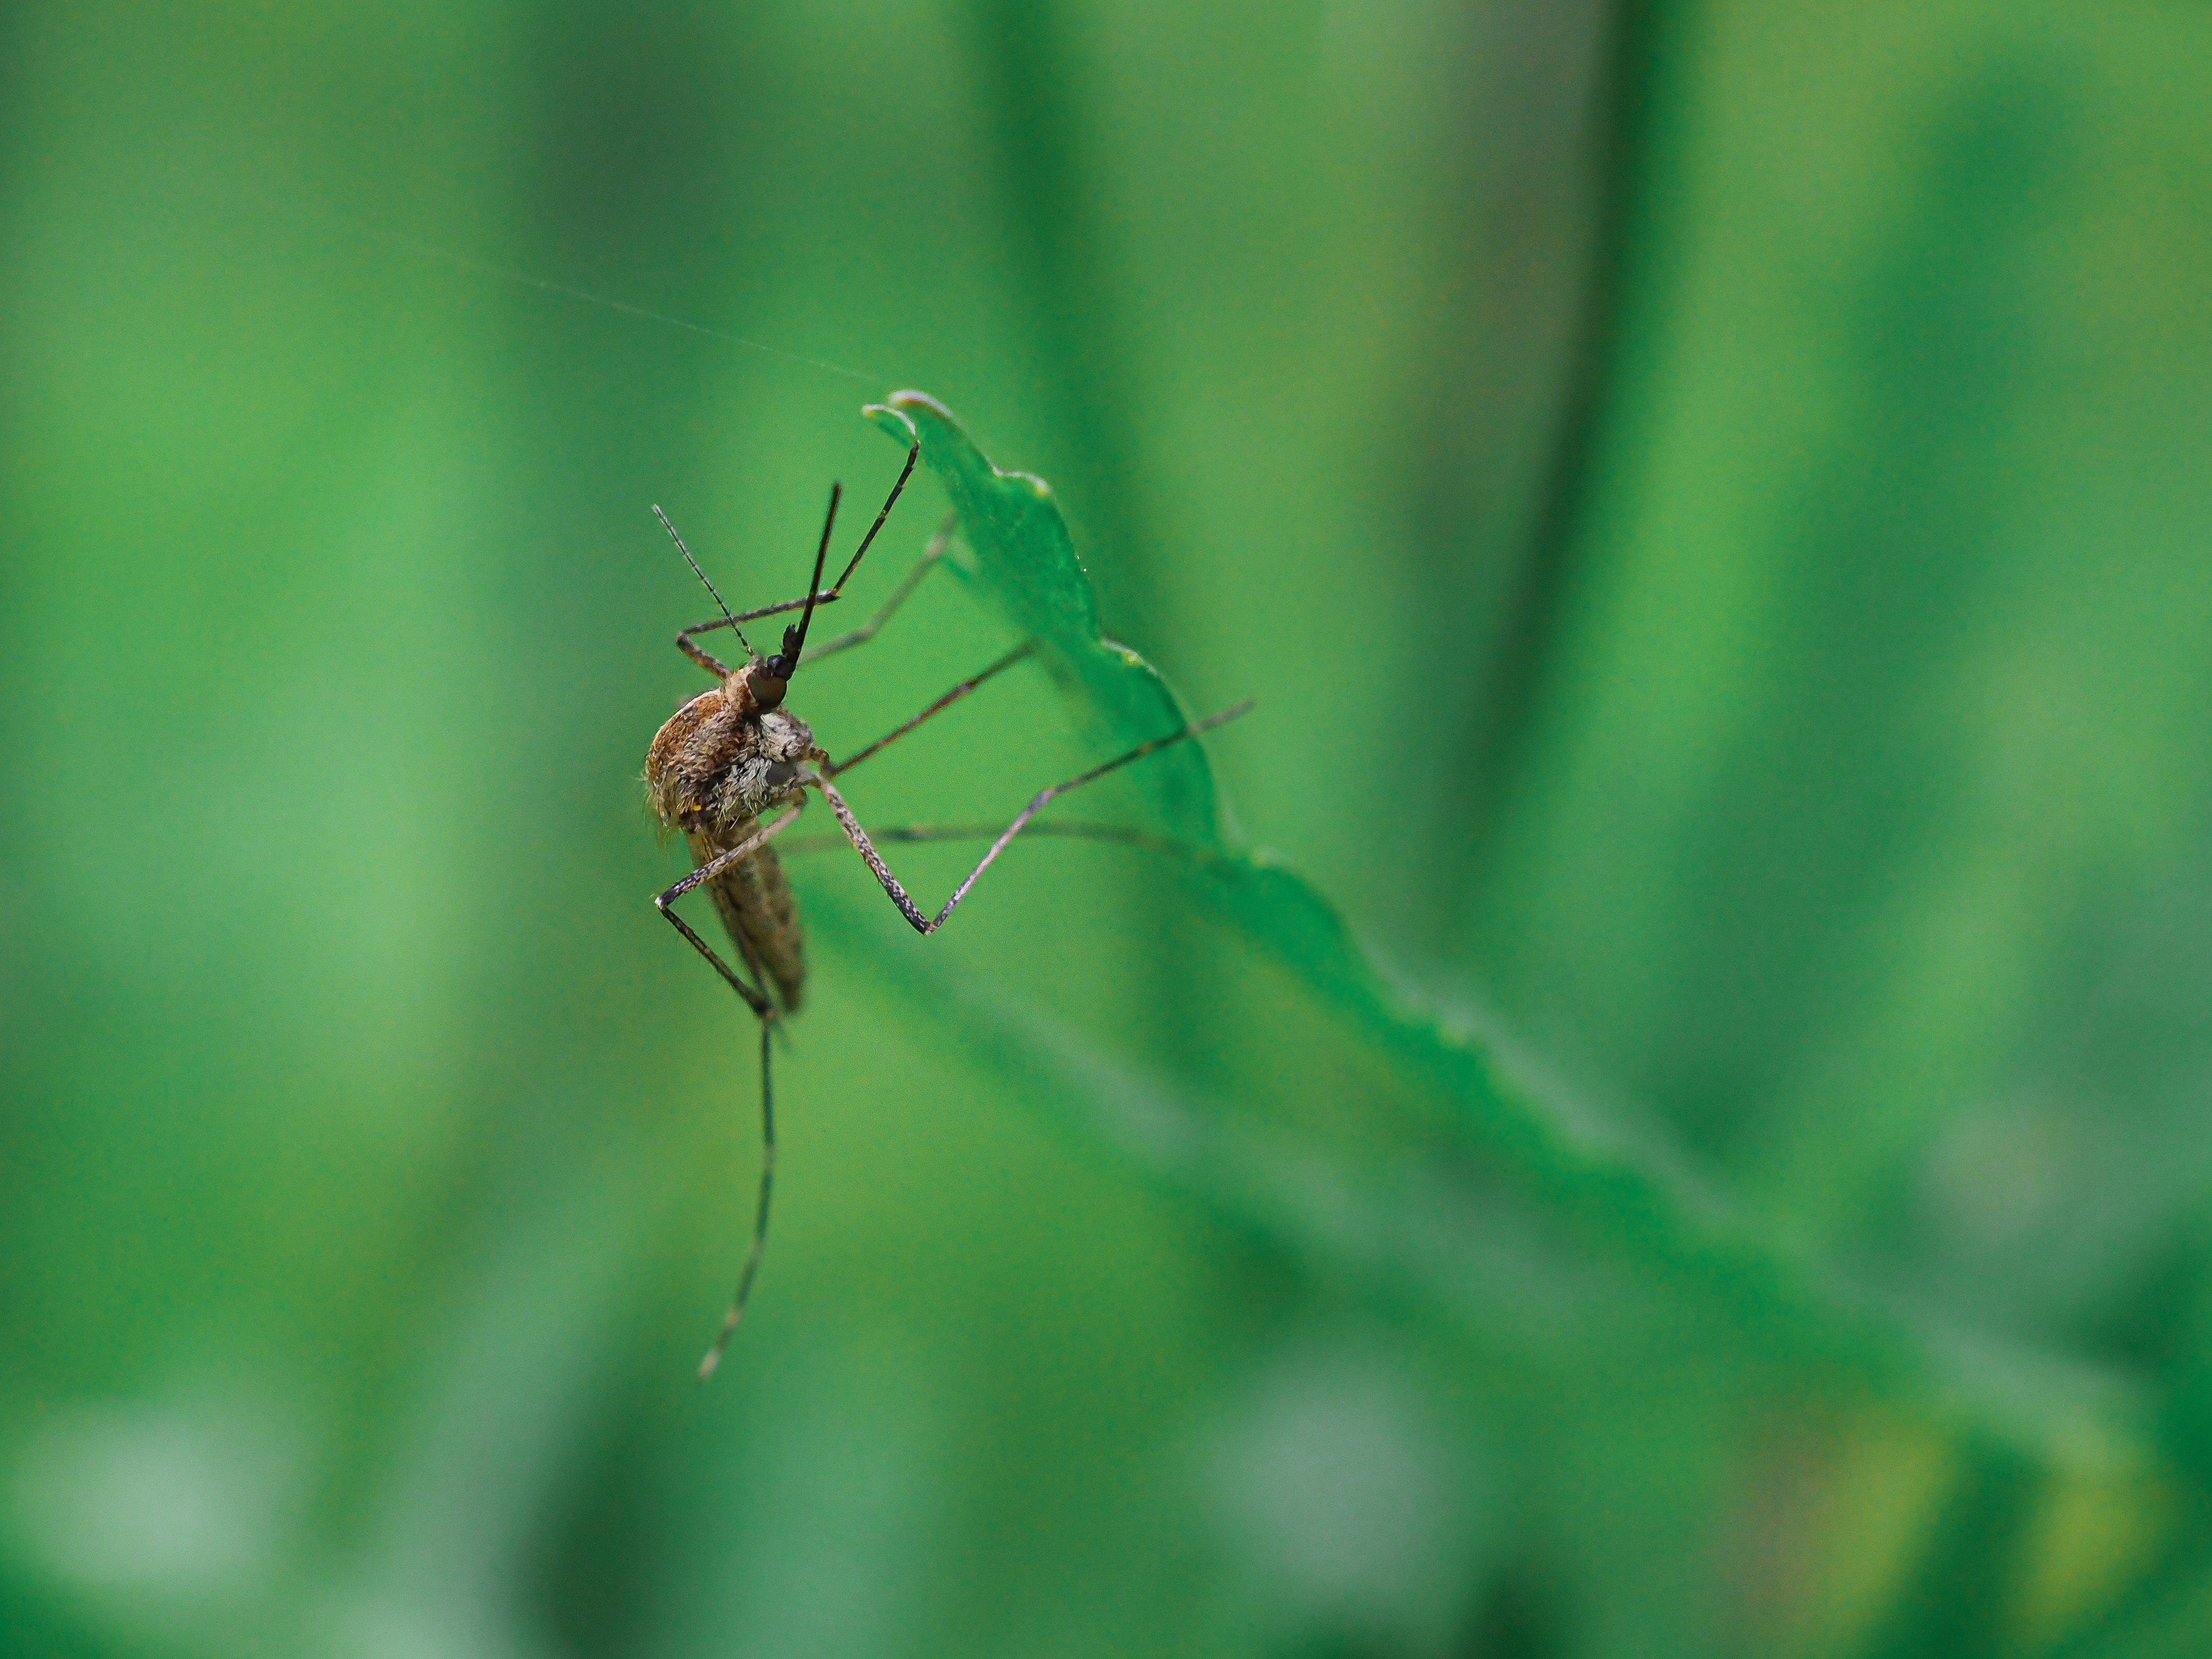 Close up of mosquito on grass